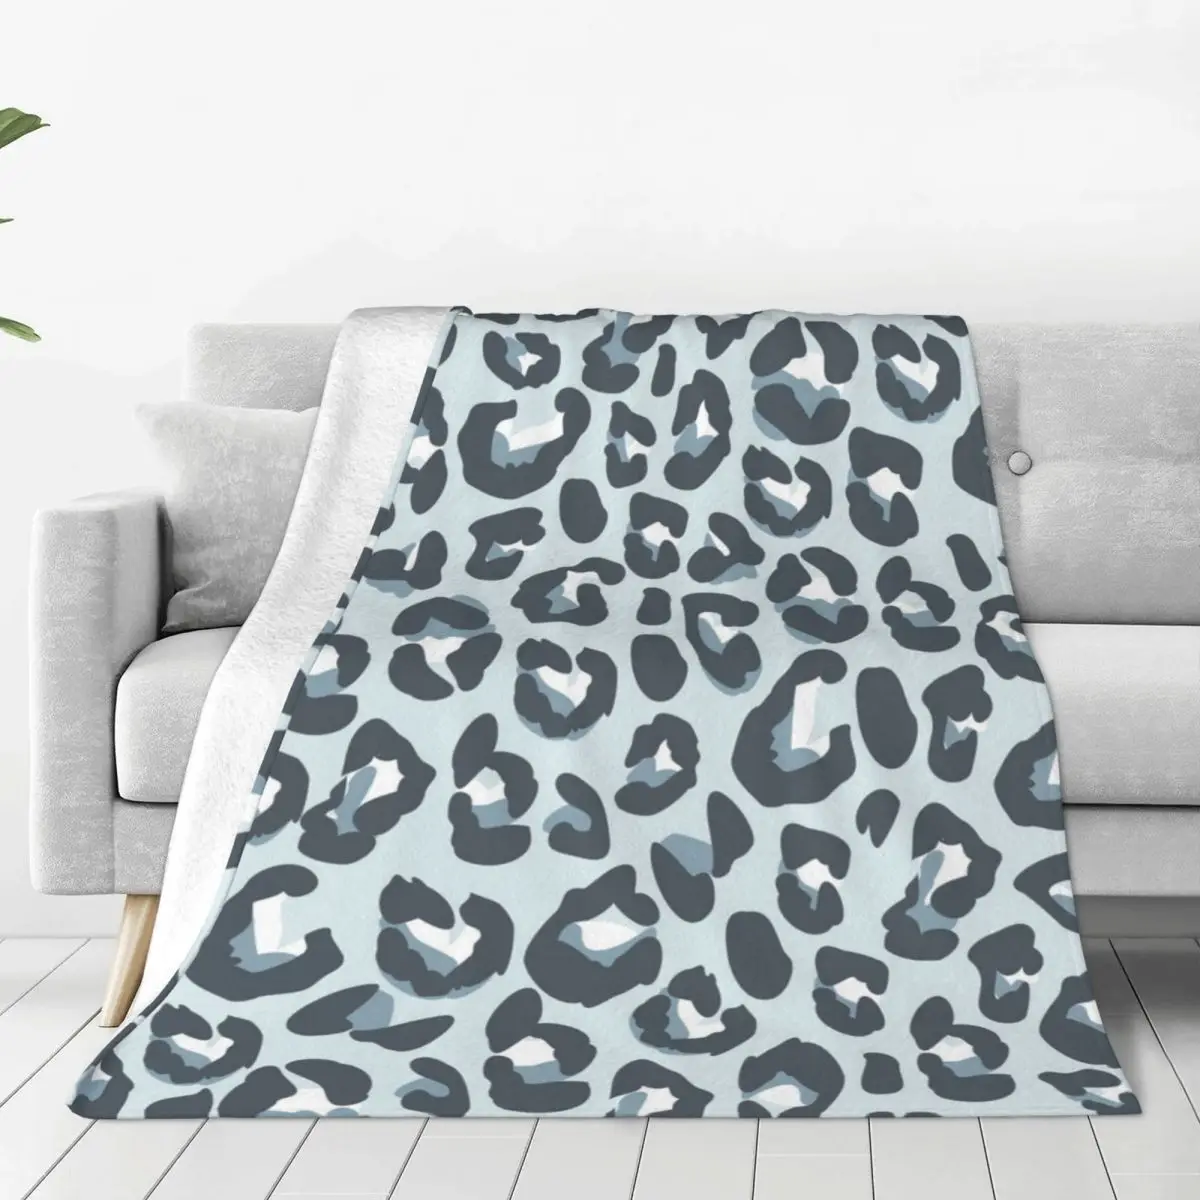 

Bue Leopard Soft Fleece Throw Blanket Warm and Cozy for All Seasons Comfy Microfiber Blanket for Couch Sofa Bed 40"x30"